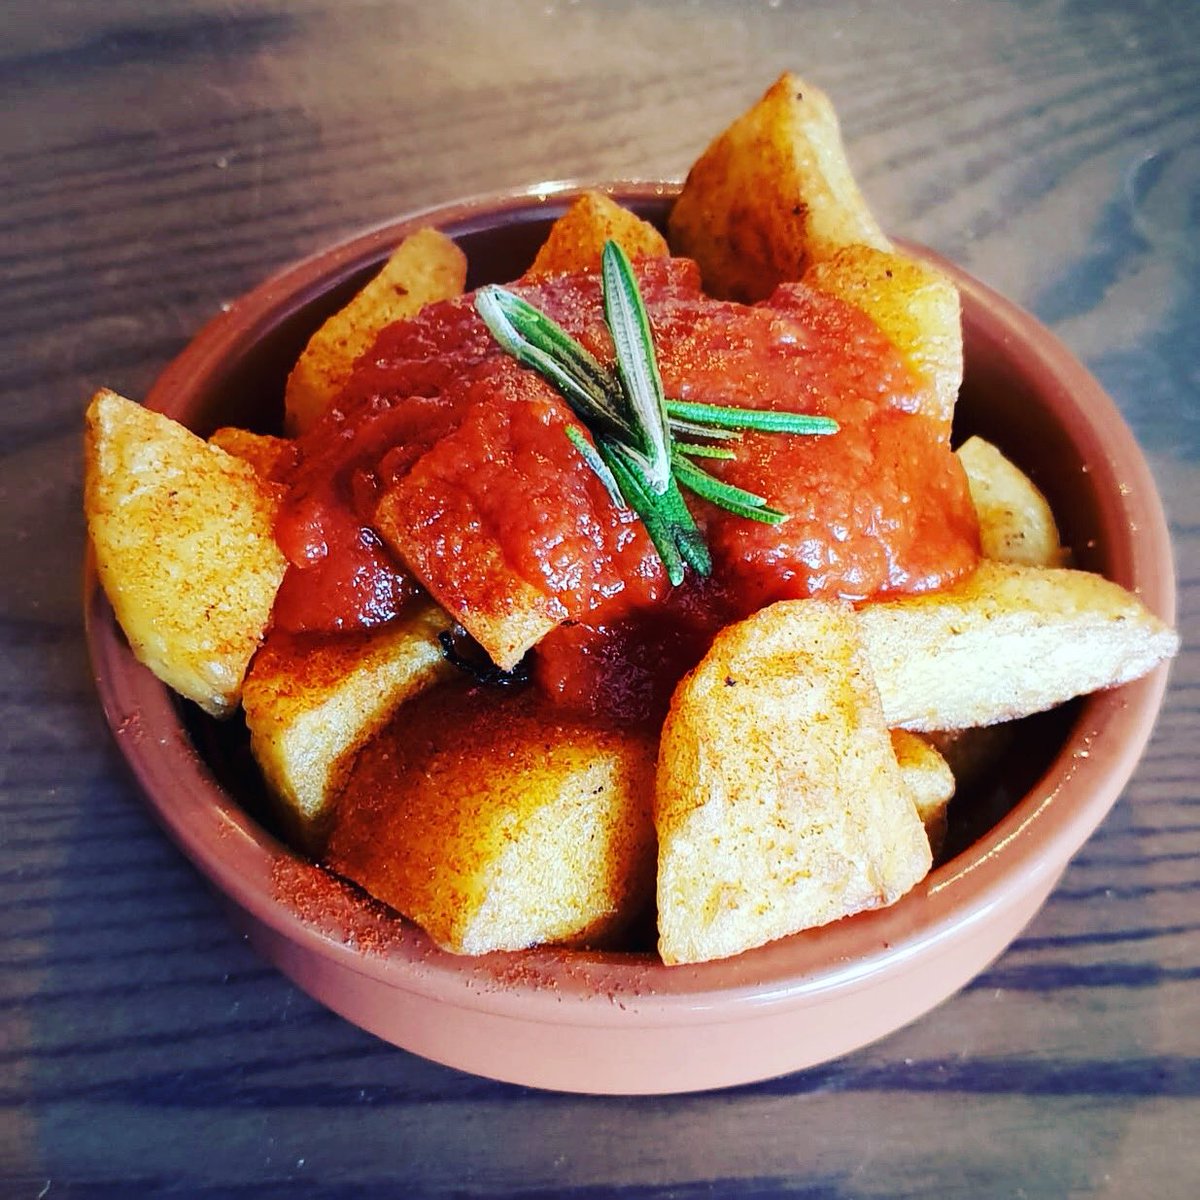 Today is a day for Patatas Bravas .... the rain can do one quite frankly - time for soul satisfying food -3 tapas = £10.95 before 5pm & 4 tapas + bottle of wine = £19.95 after 5pm. So pop in, dry off, warm up and chill out on #tapastuesday. #chesterdeals #chester #chesterindies